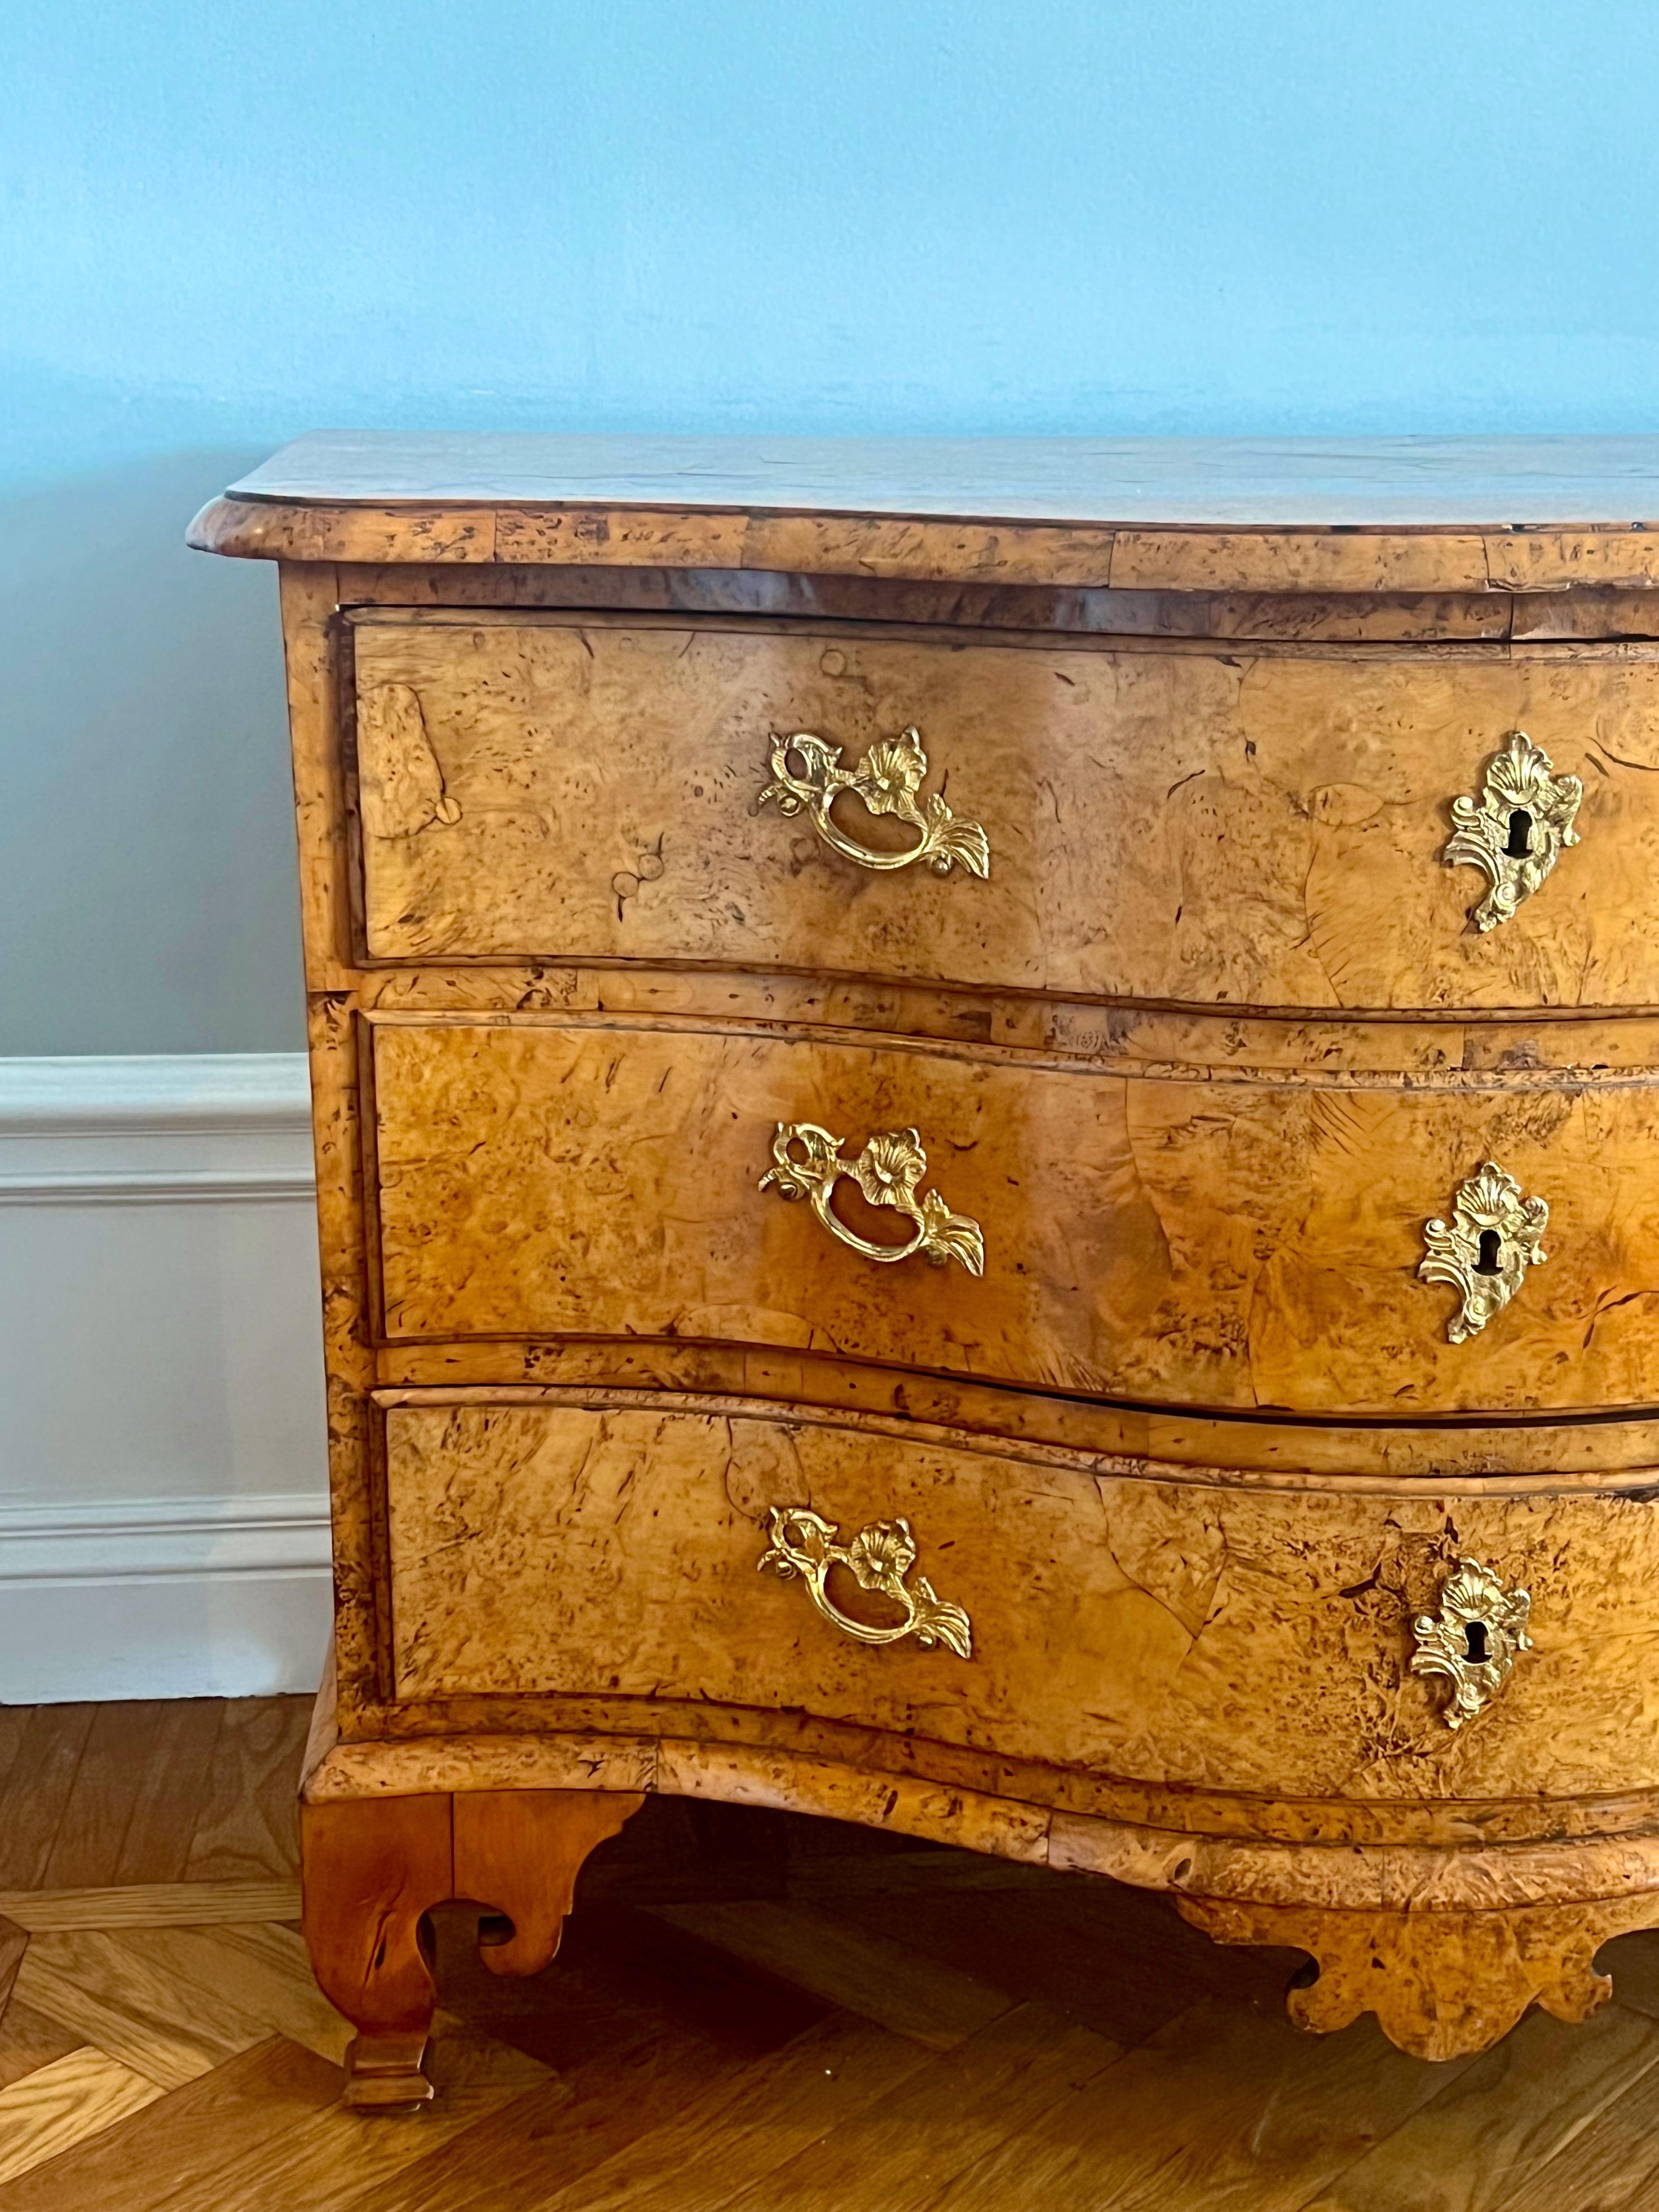 A beautiful 18th century Swedish baroque chest of drawers, alder root. This late baroque commode is made around 1740-60. During the 18th and 19th century it became popular to use the root from the alder tree to make furniture in the cities laying